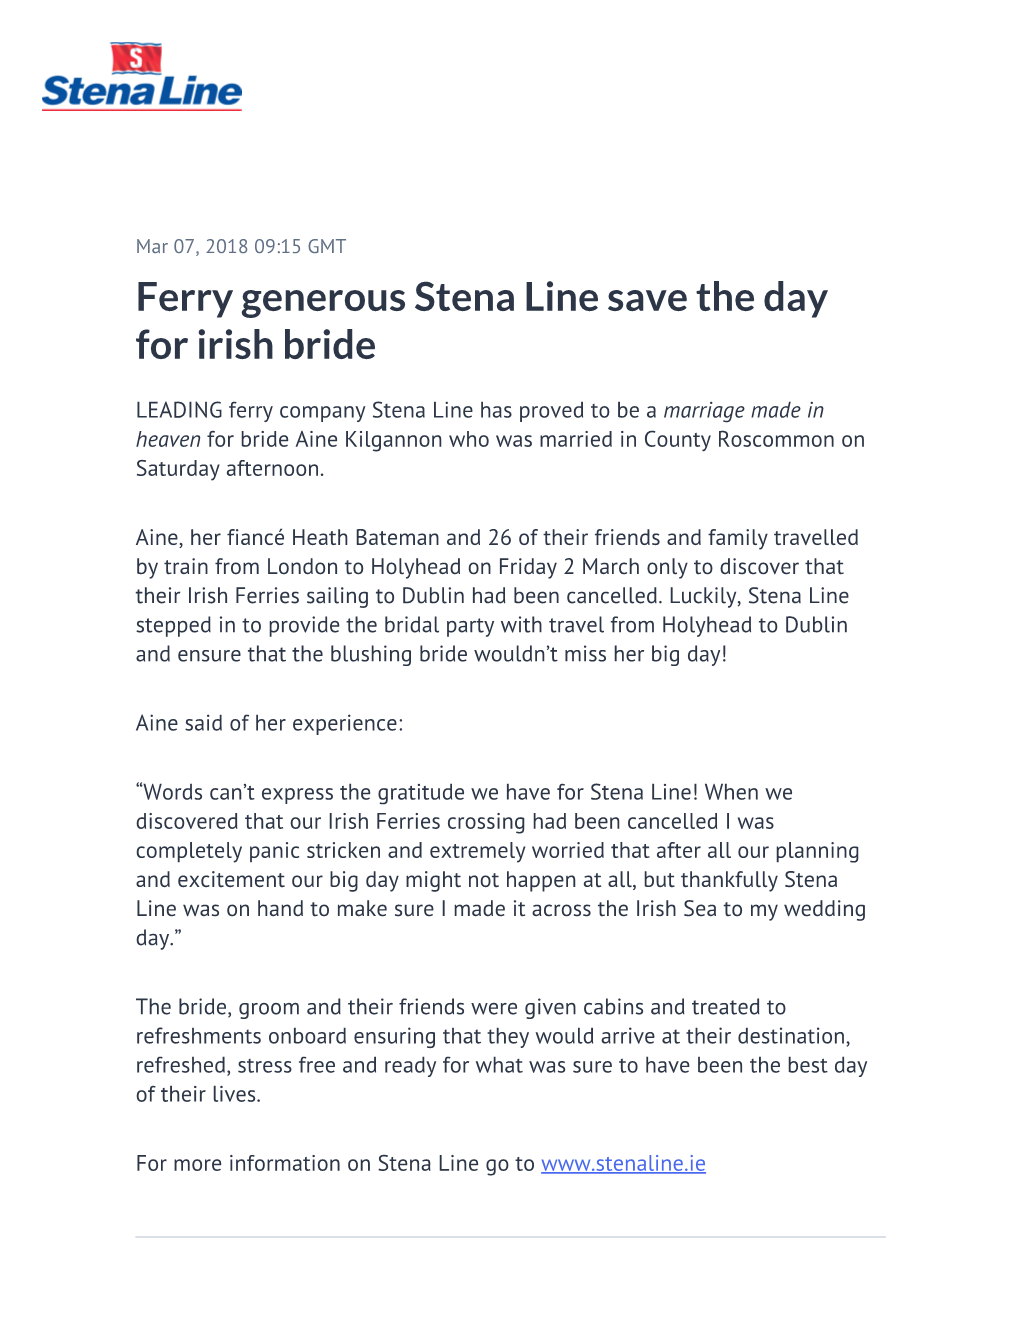 Ferry Generous Stena Line Save the Day for Irish Bride